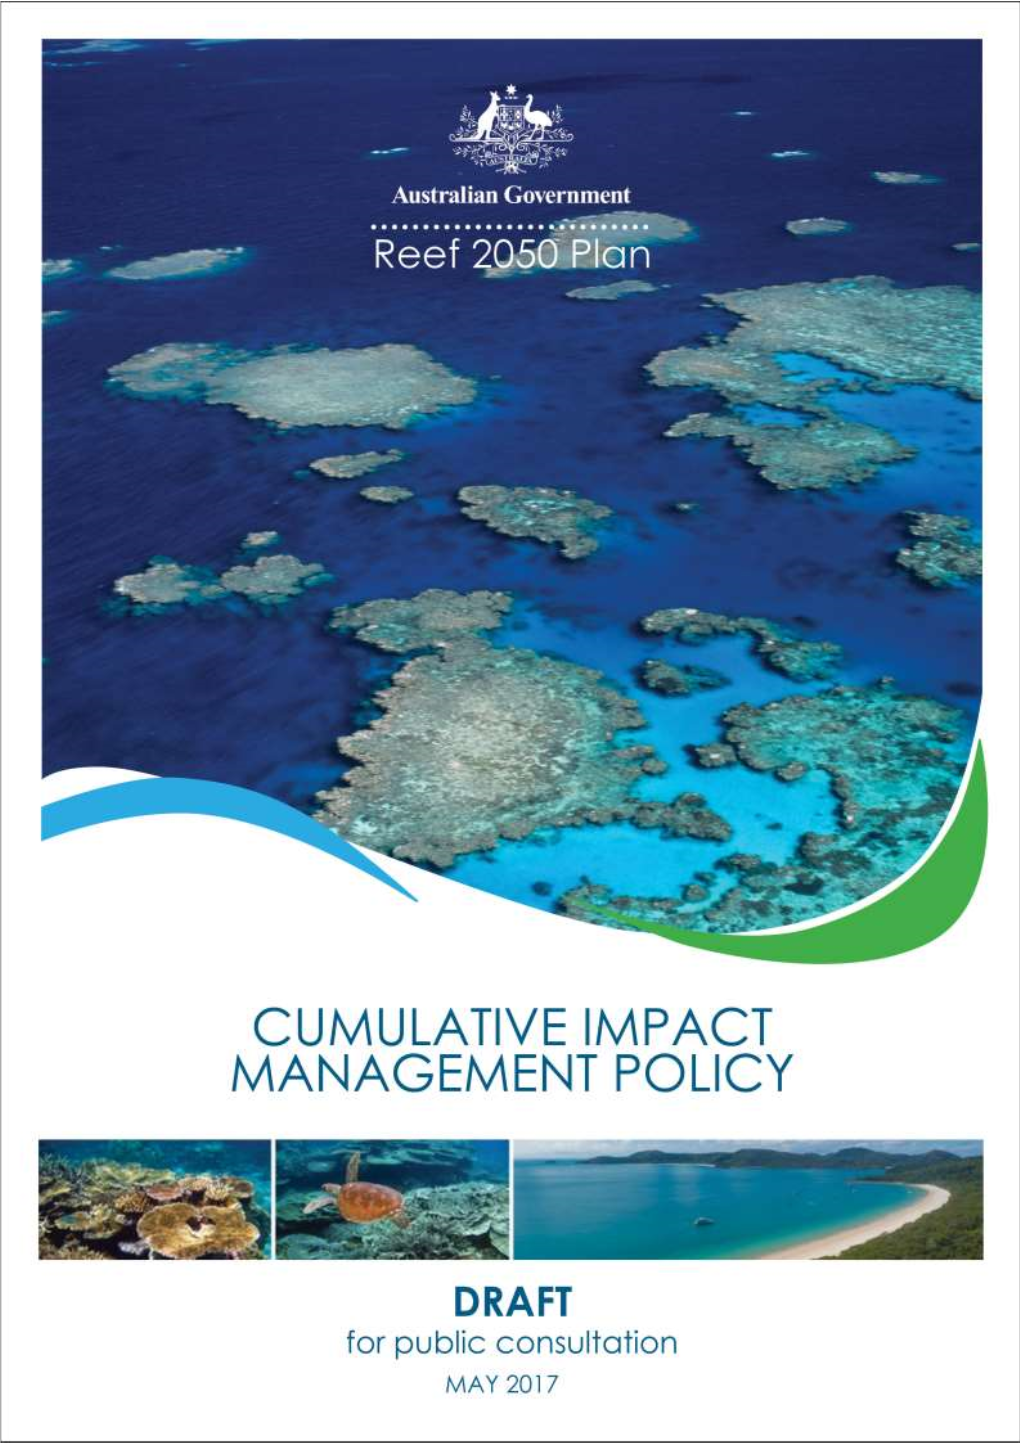 Drivers of Change, Pressures and Impacts on the Great Barrier Reef